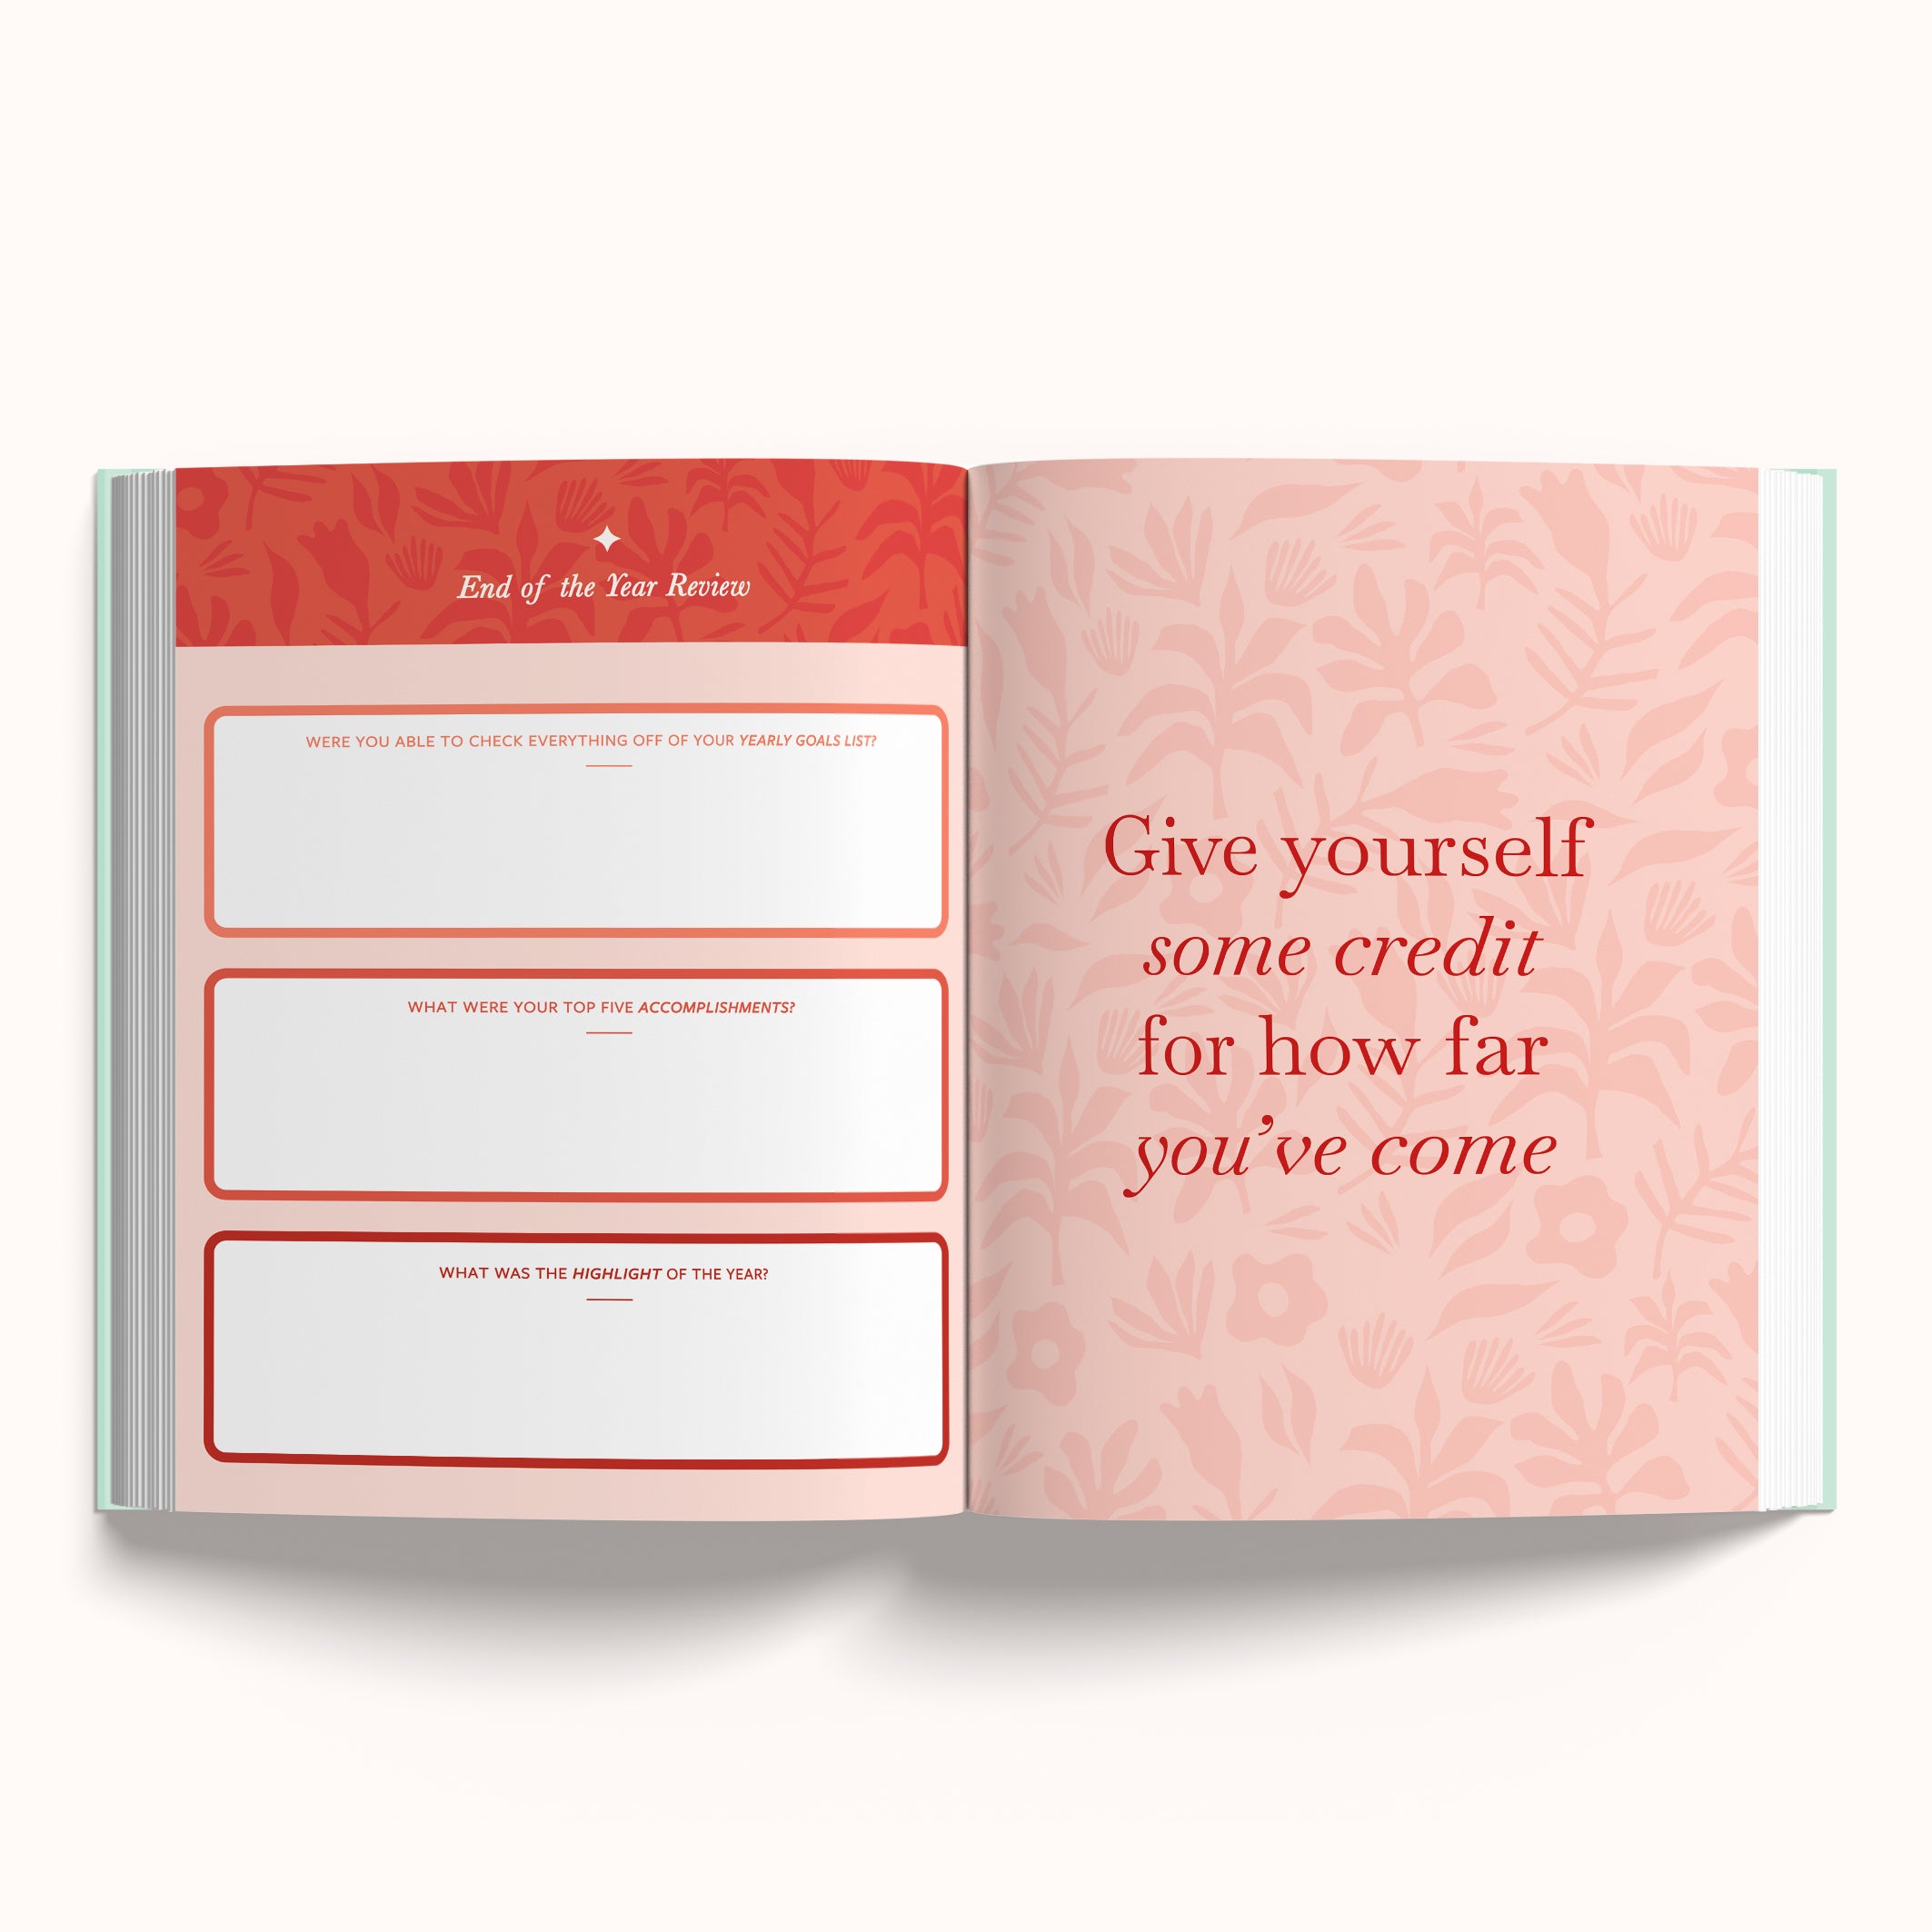 The Magic is in You       -       Annual Undated Planner